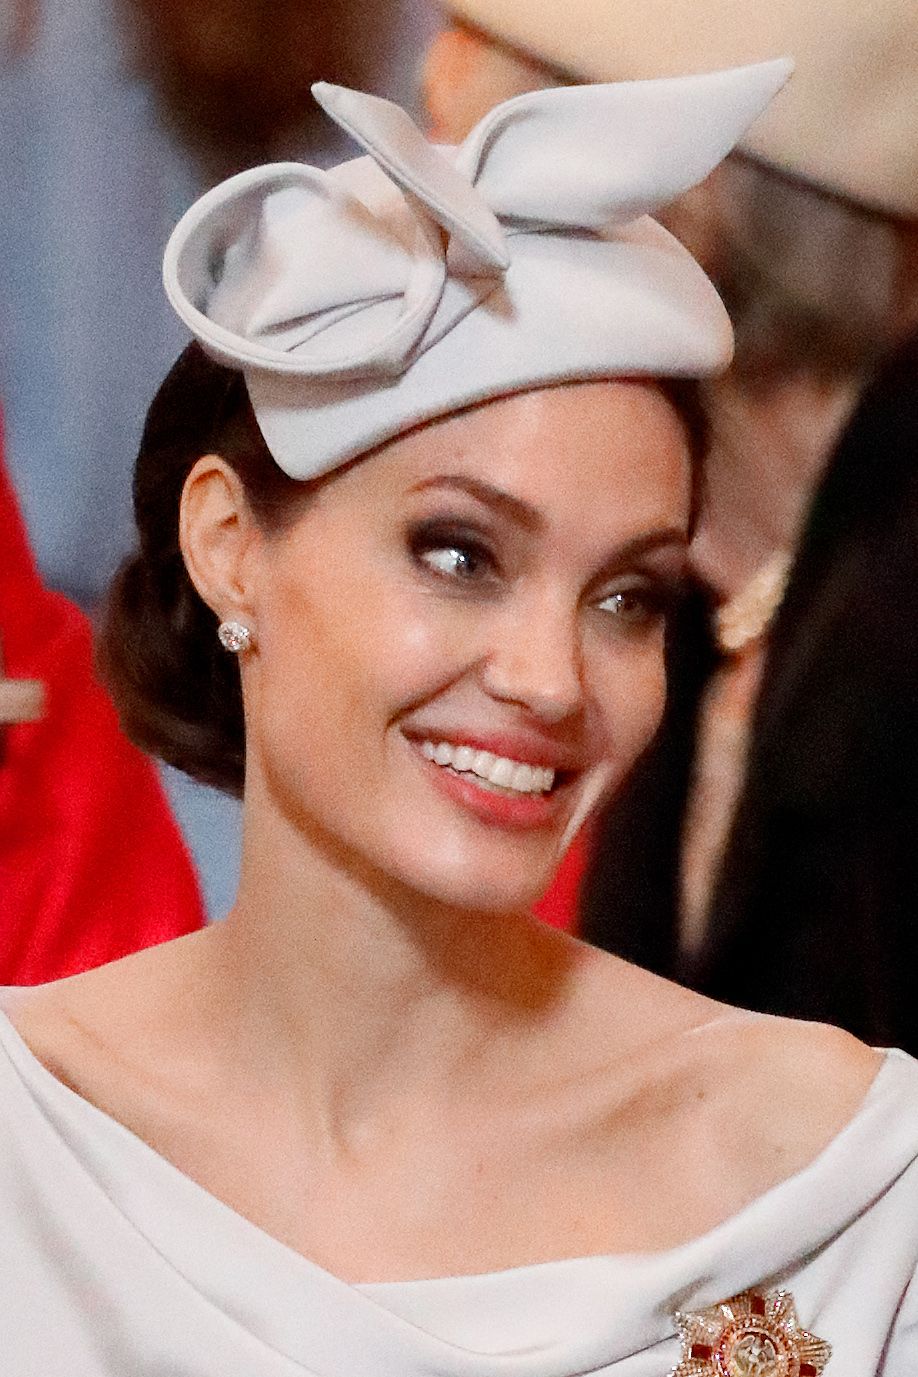 Angelina Jolie's Best Hair And Makeup Looks